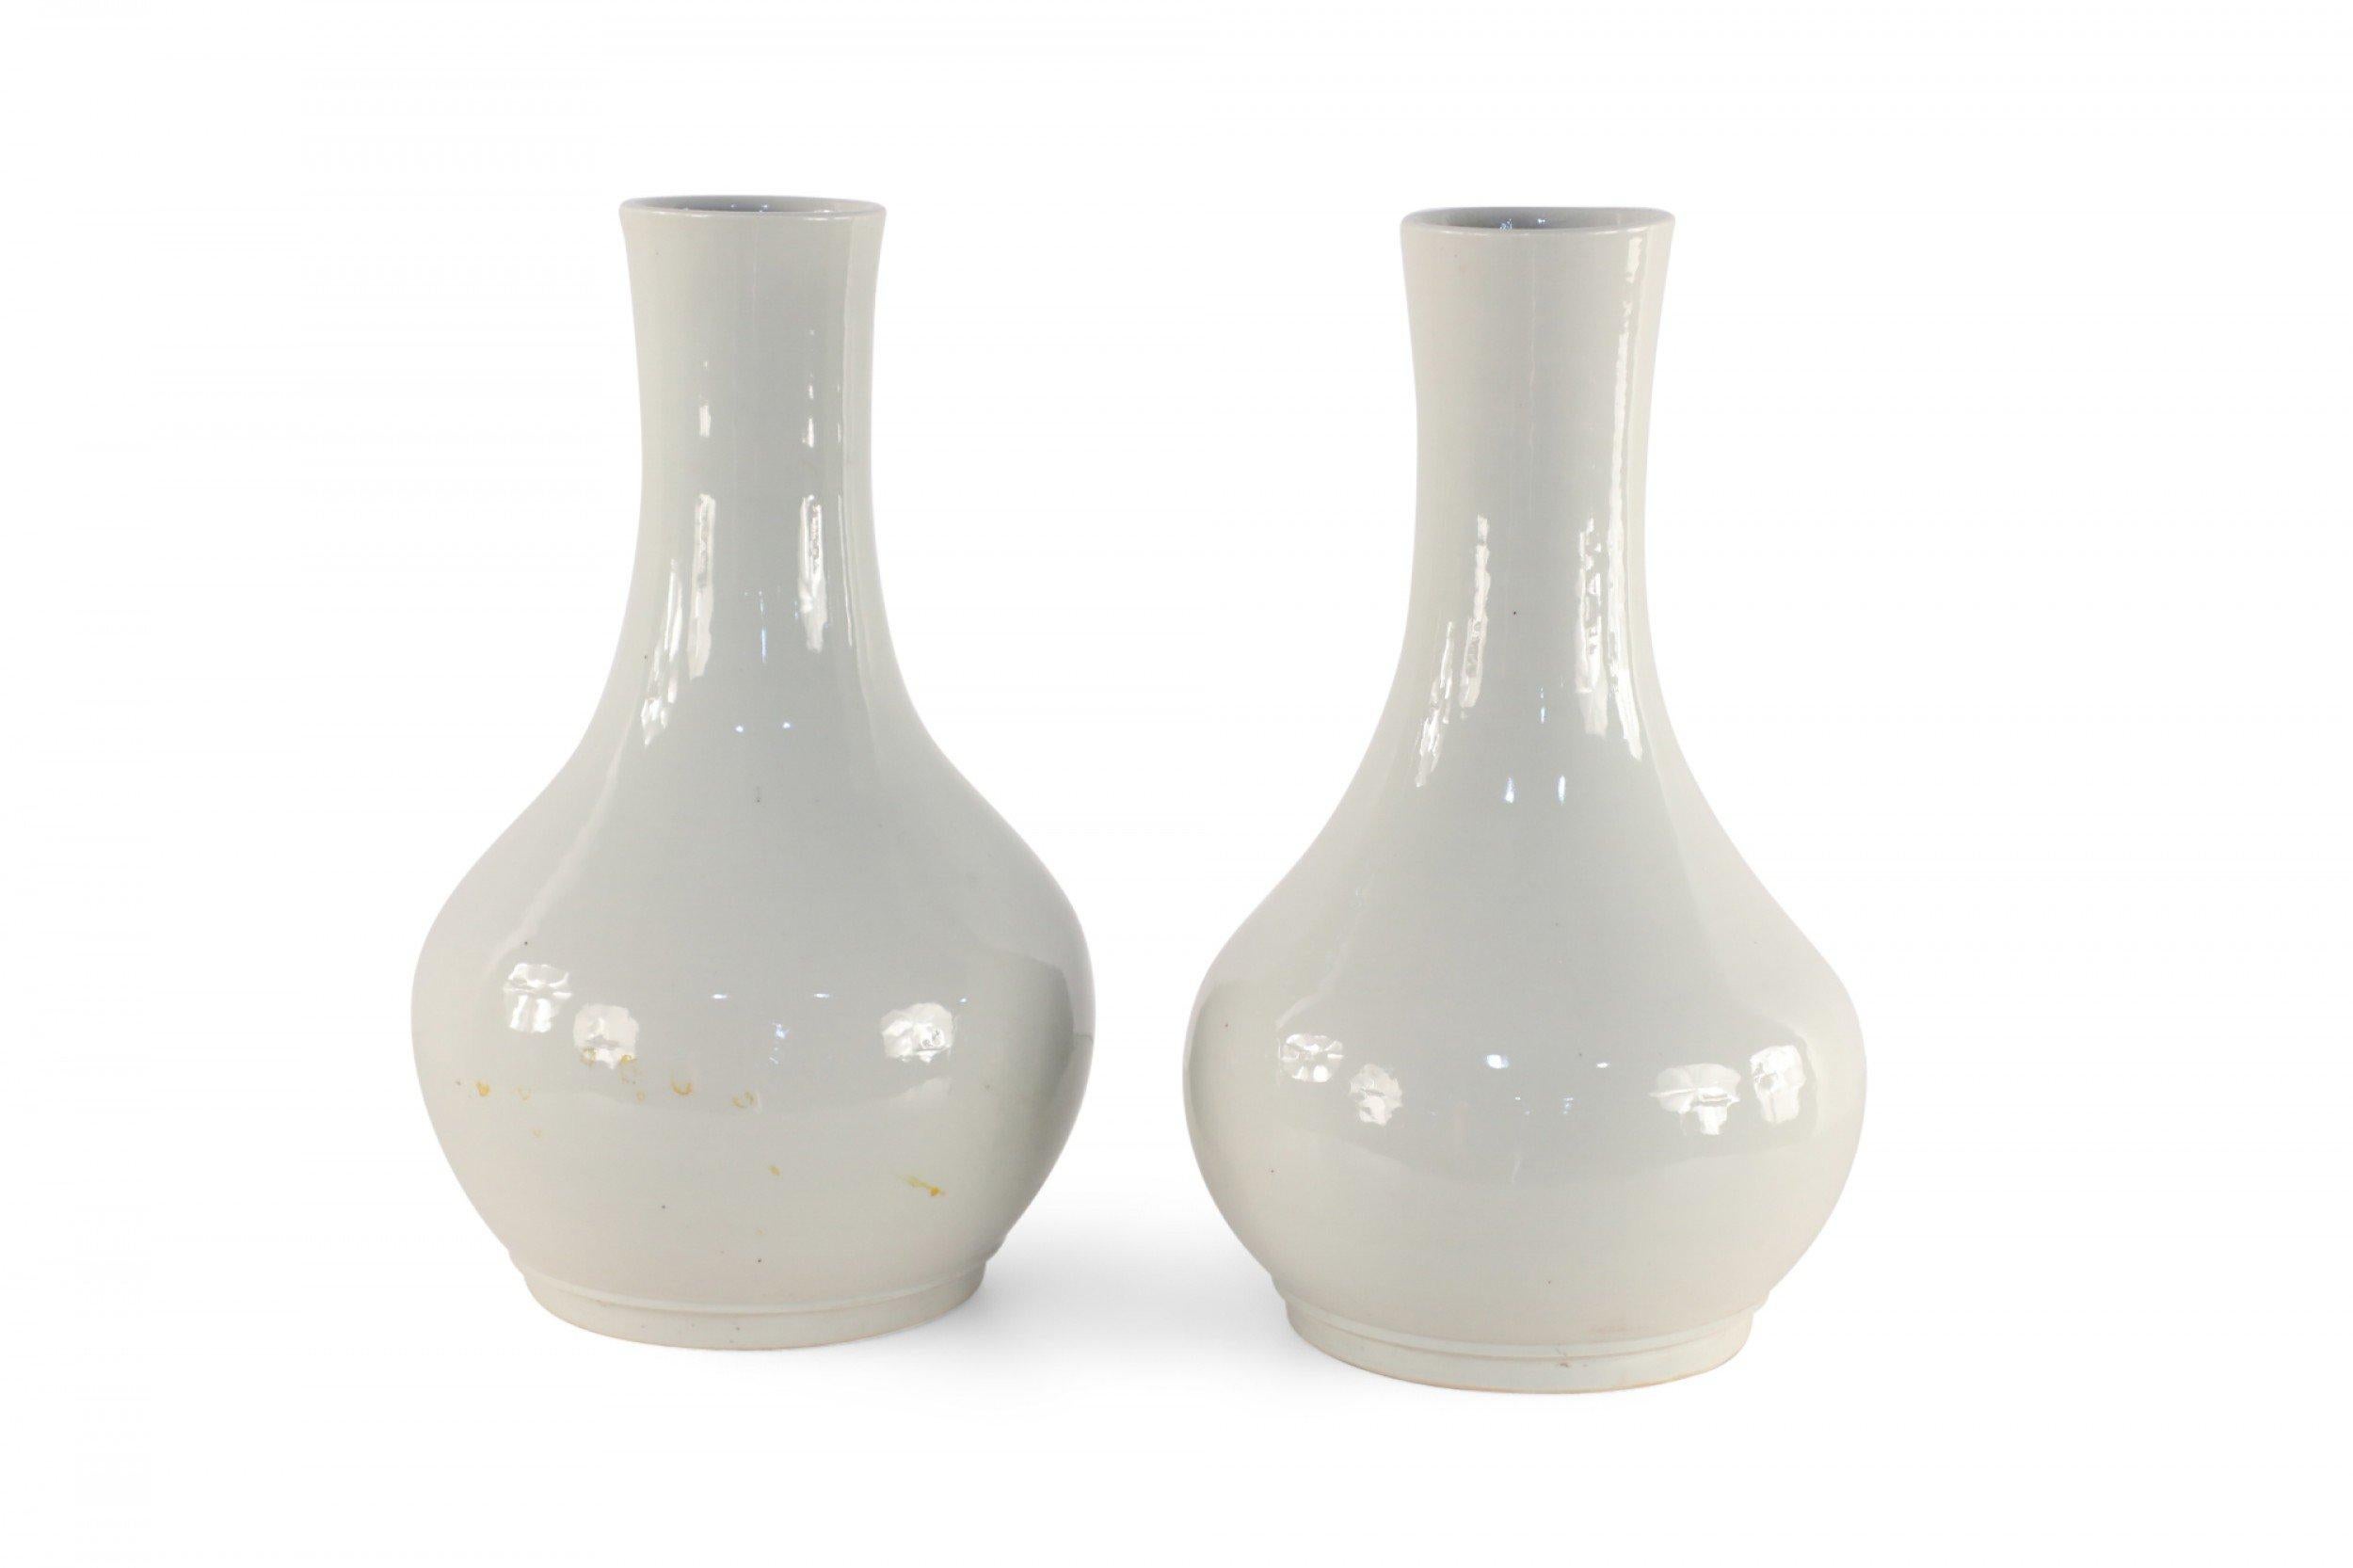 Pair of Chinese Pale Gray Glazed Porcelain Vases In Good Condition For Sale In New York, NY